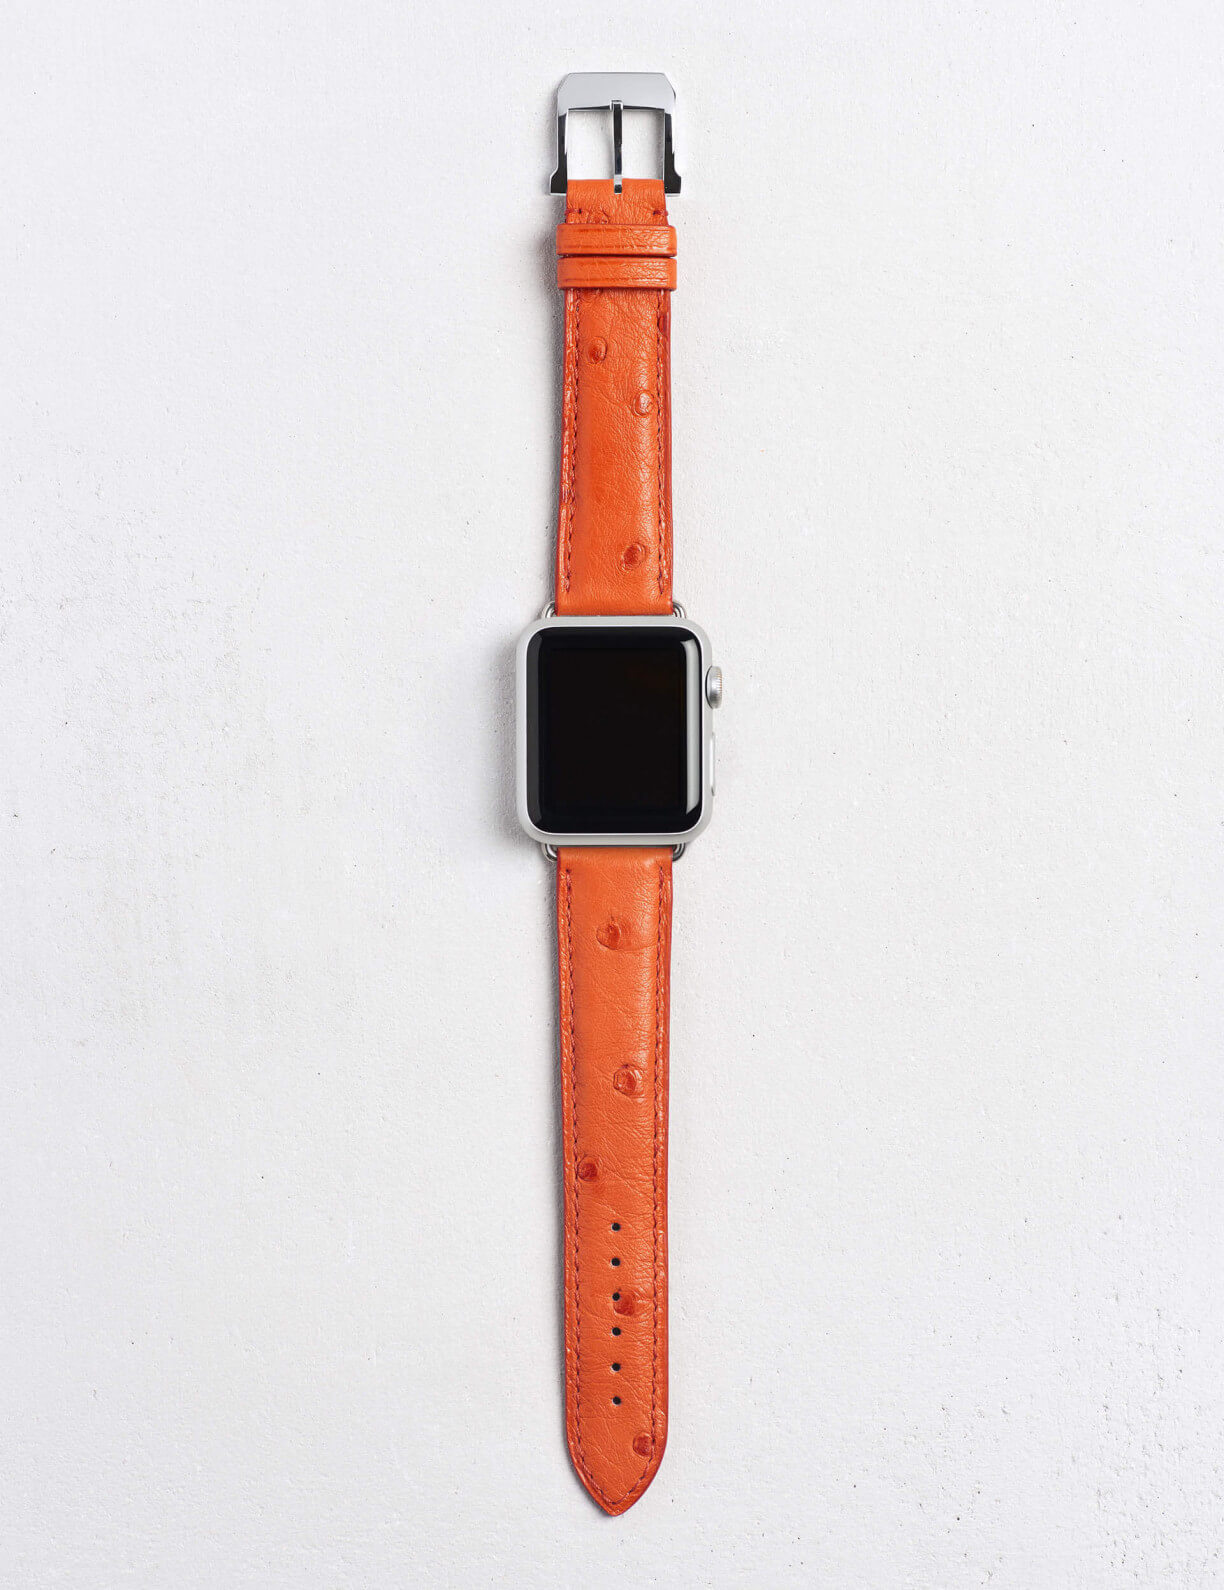 AONUOWE Luxury Watch Band for Apple Watch